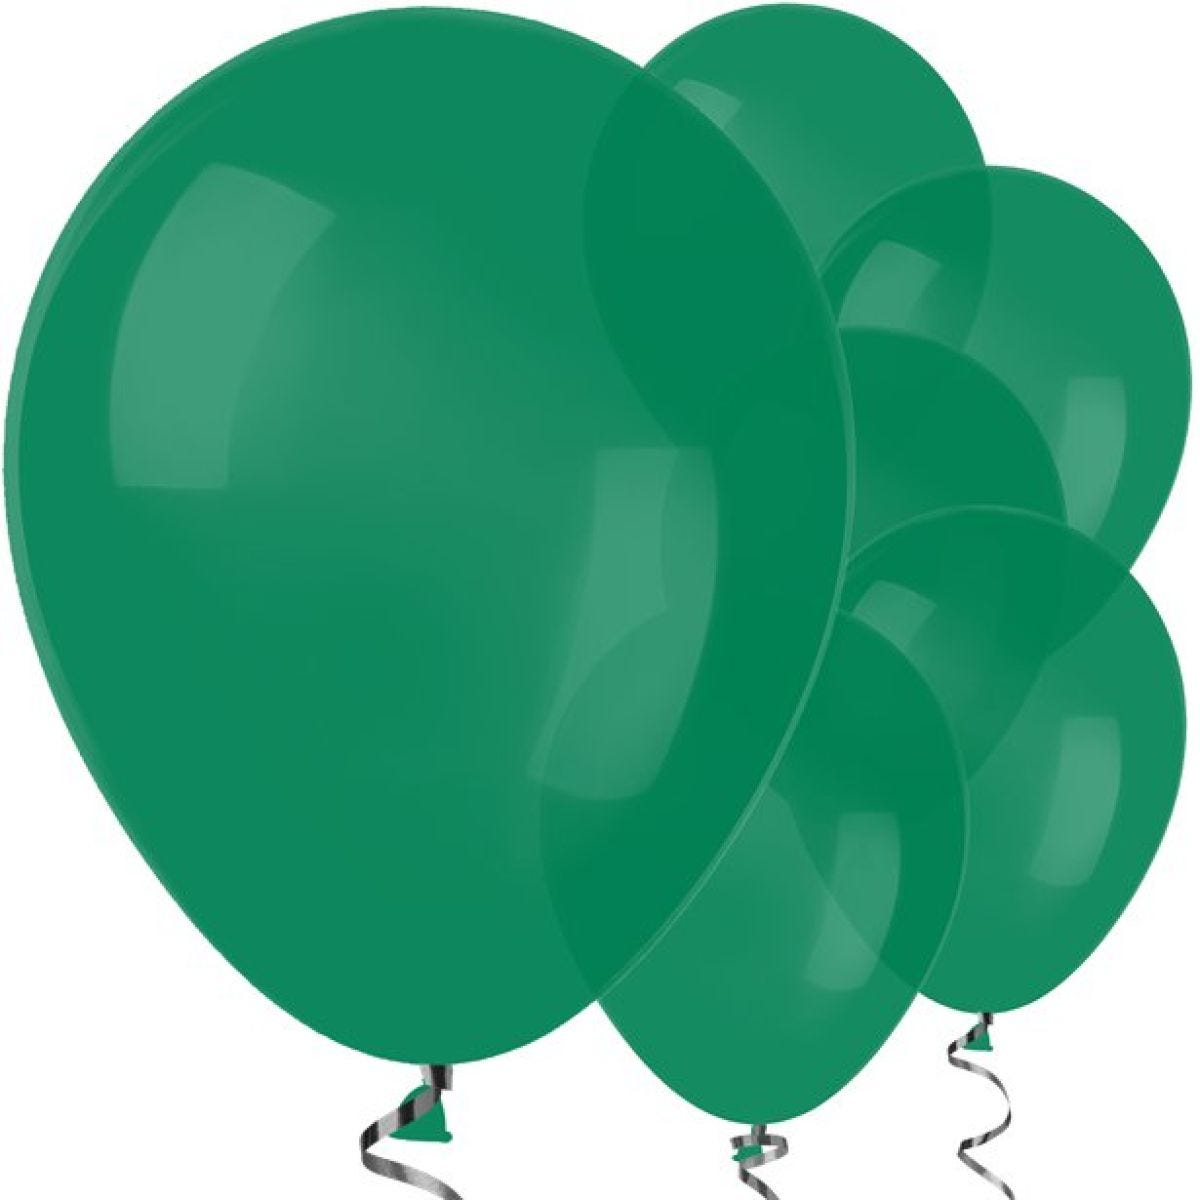 Forest Green Balloons - 12" Latex Balloons